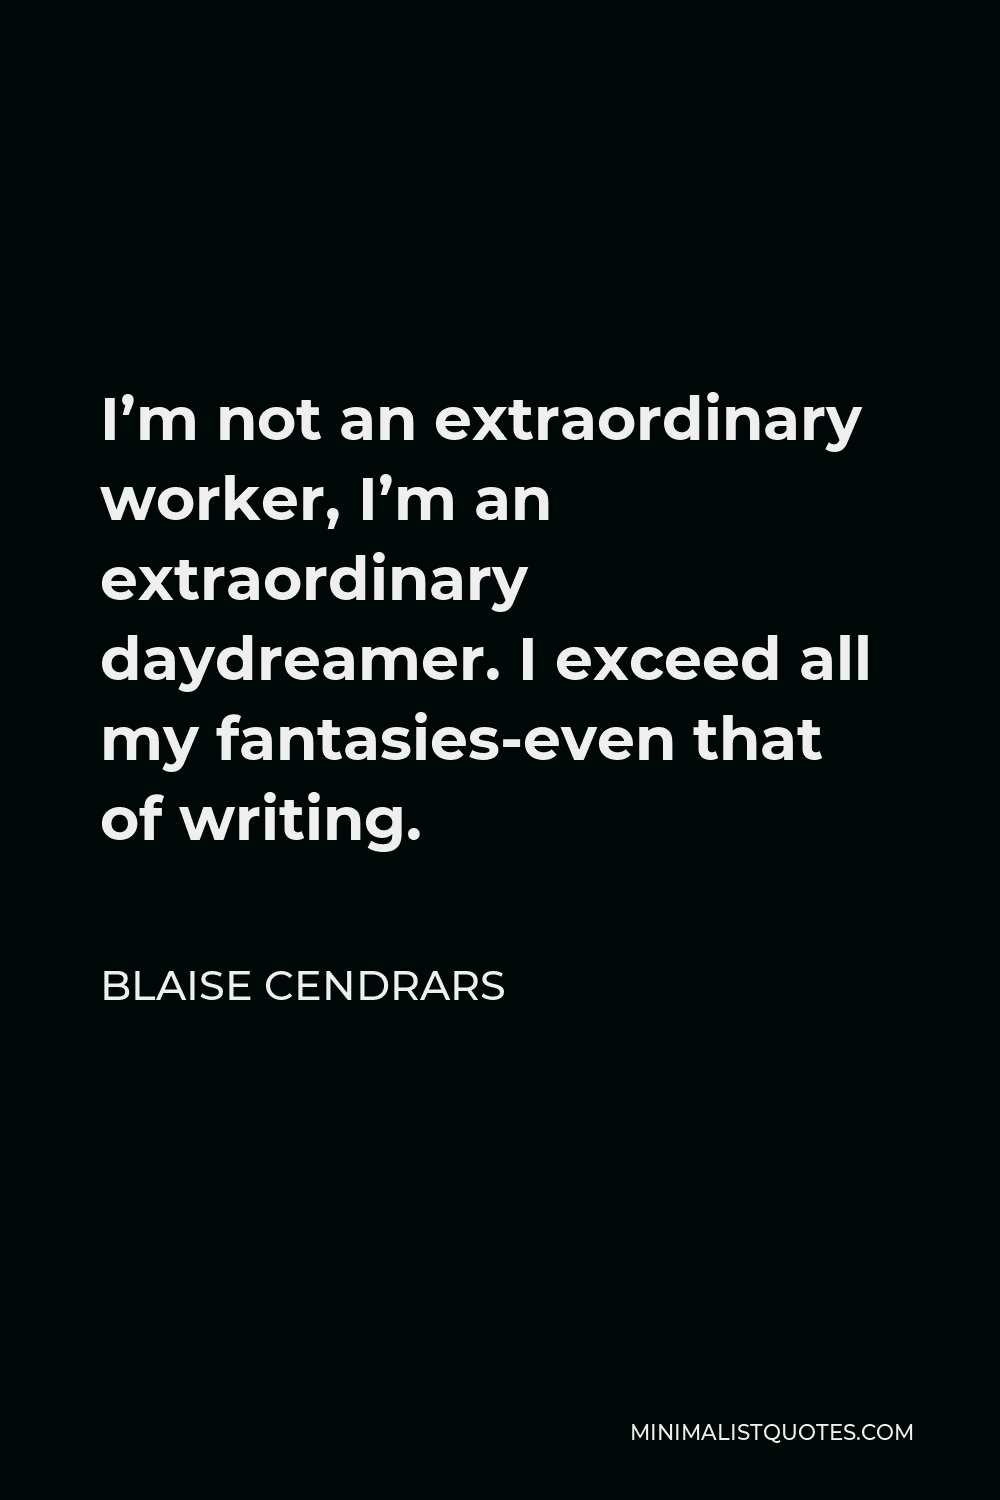 Blaise Cendrars Quote - I’m not an extraordinary worker, I’m an extraordinary daydreamer. I exceed all my fantasies-even that of writing.